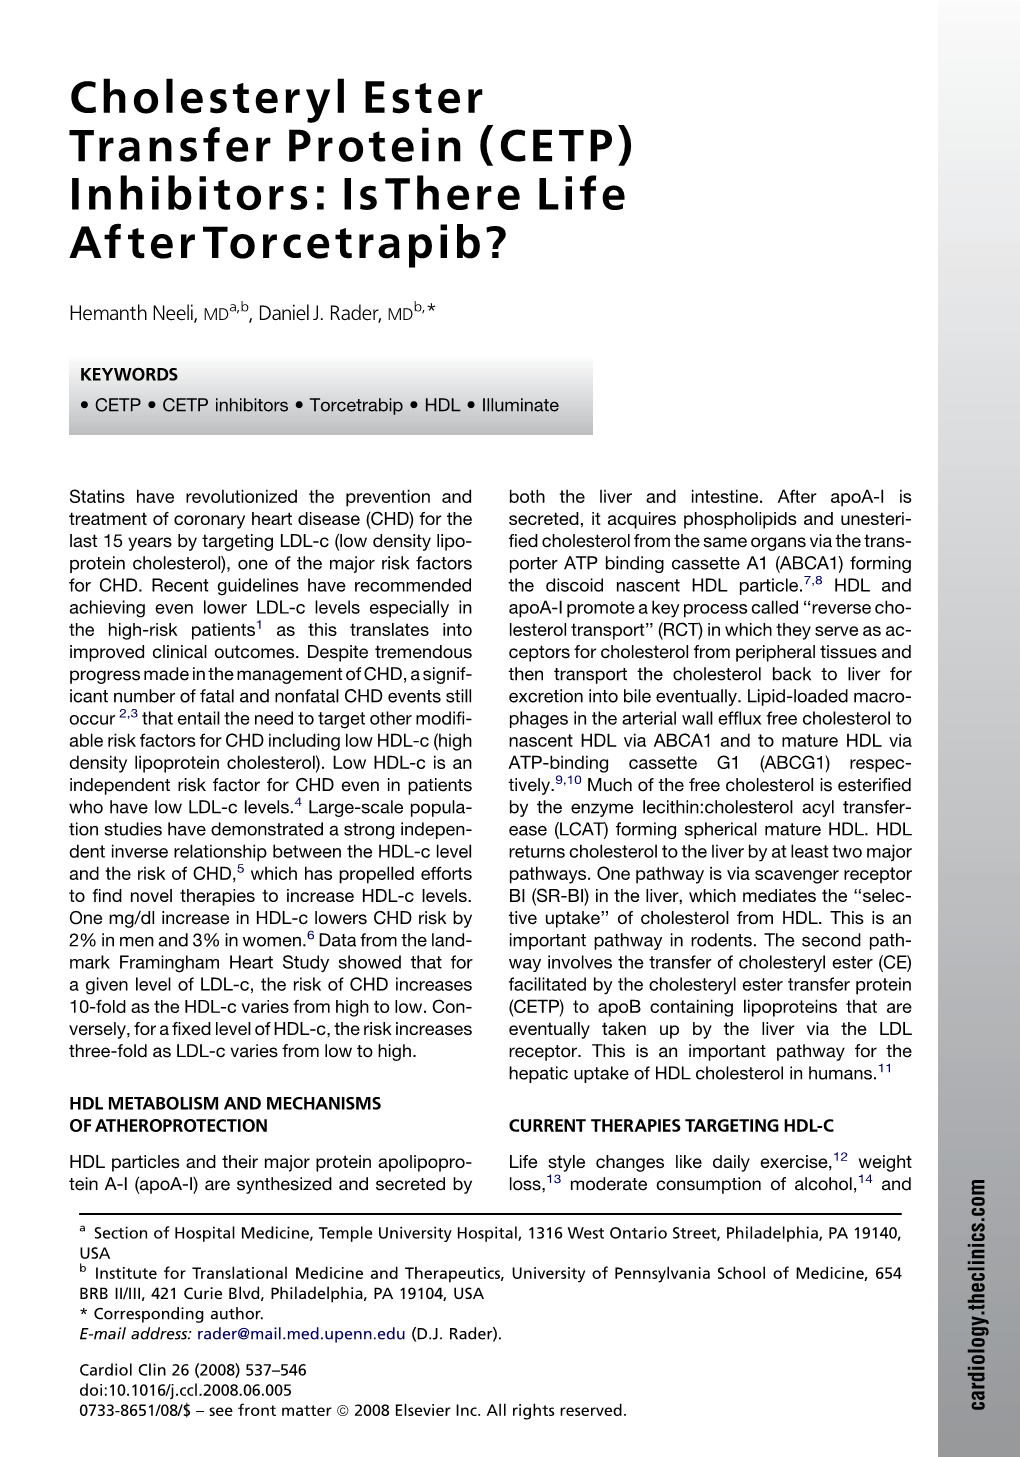 Cholesteryl Ester Transfer Protein (CETP) Inhibitors: Is There Life After Torcetrapib?